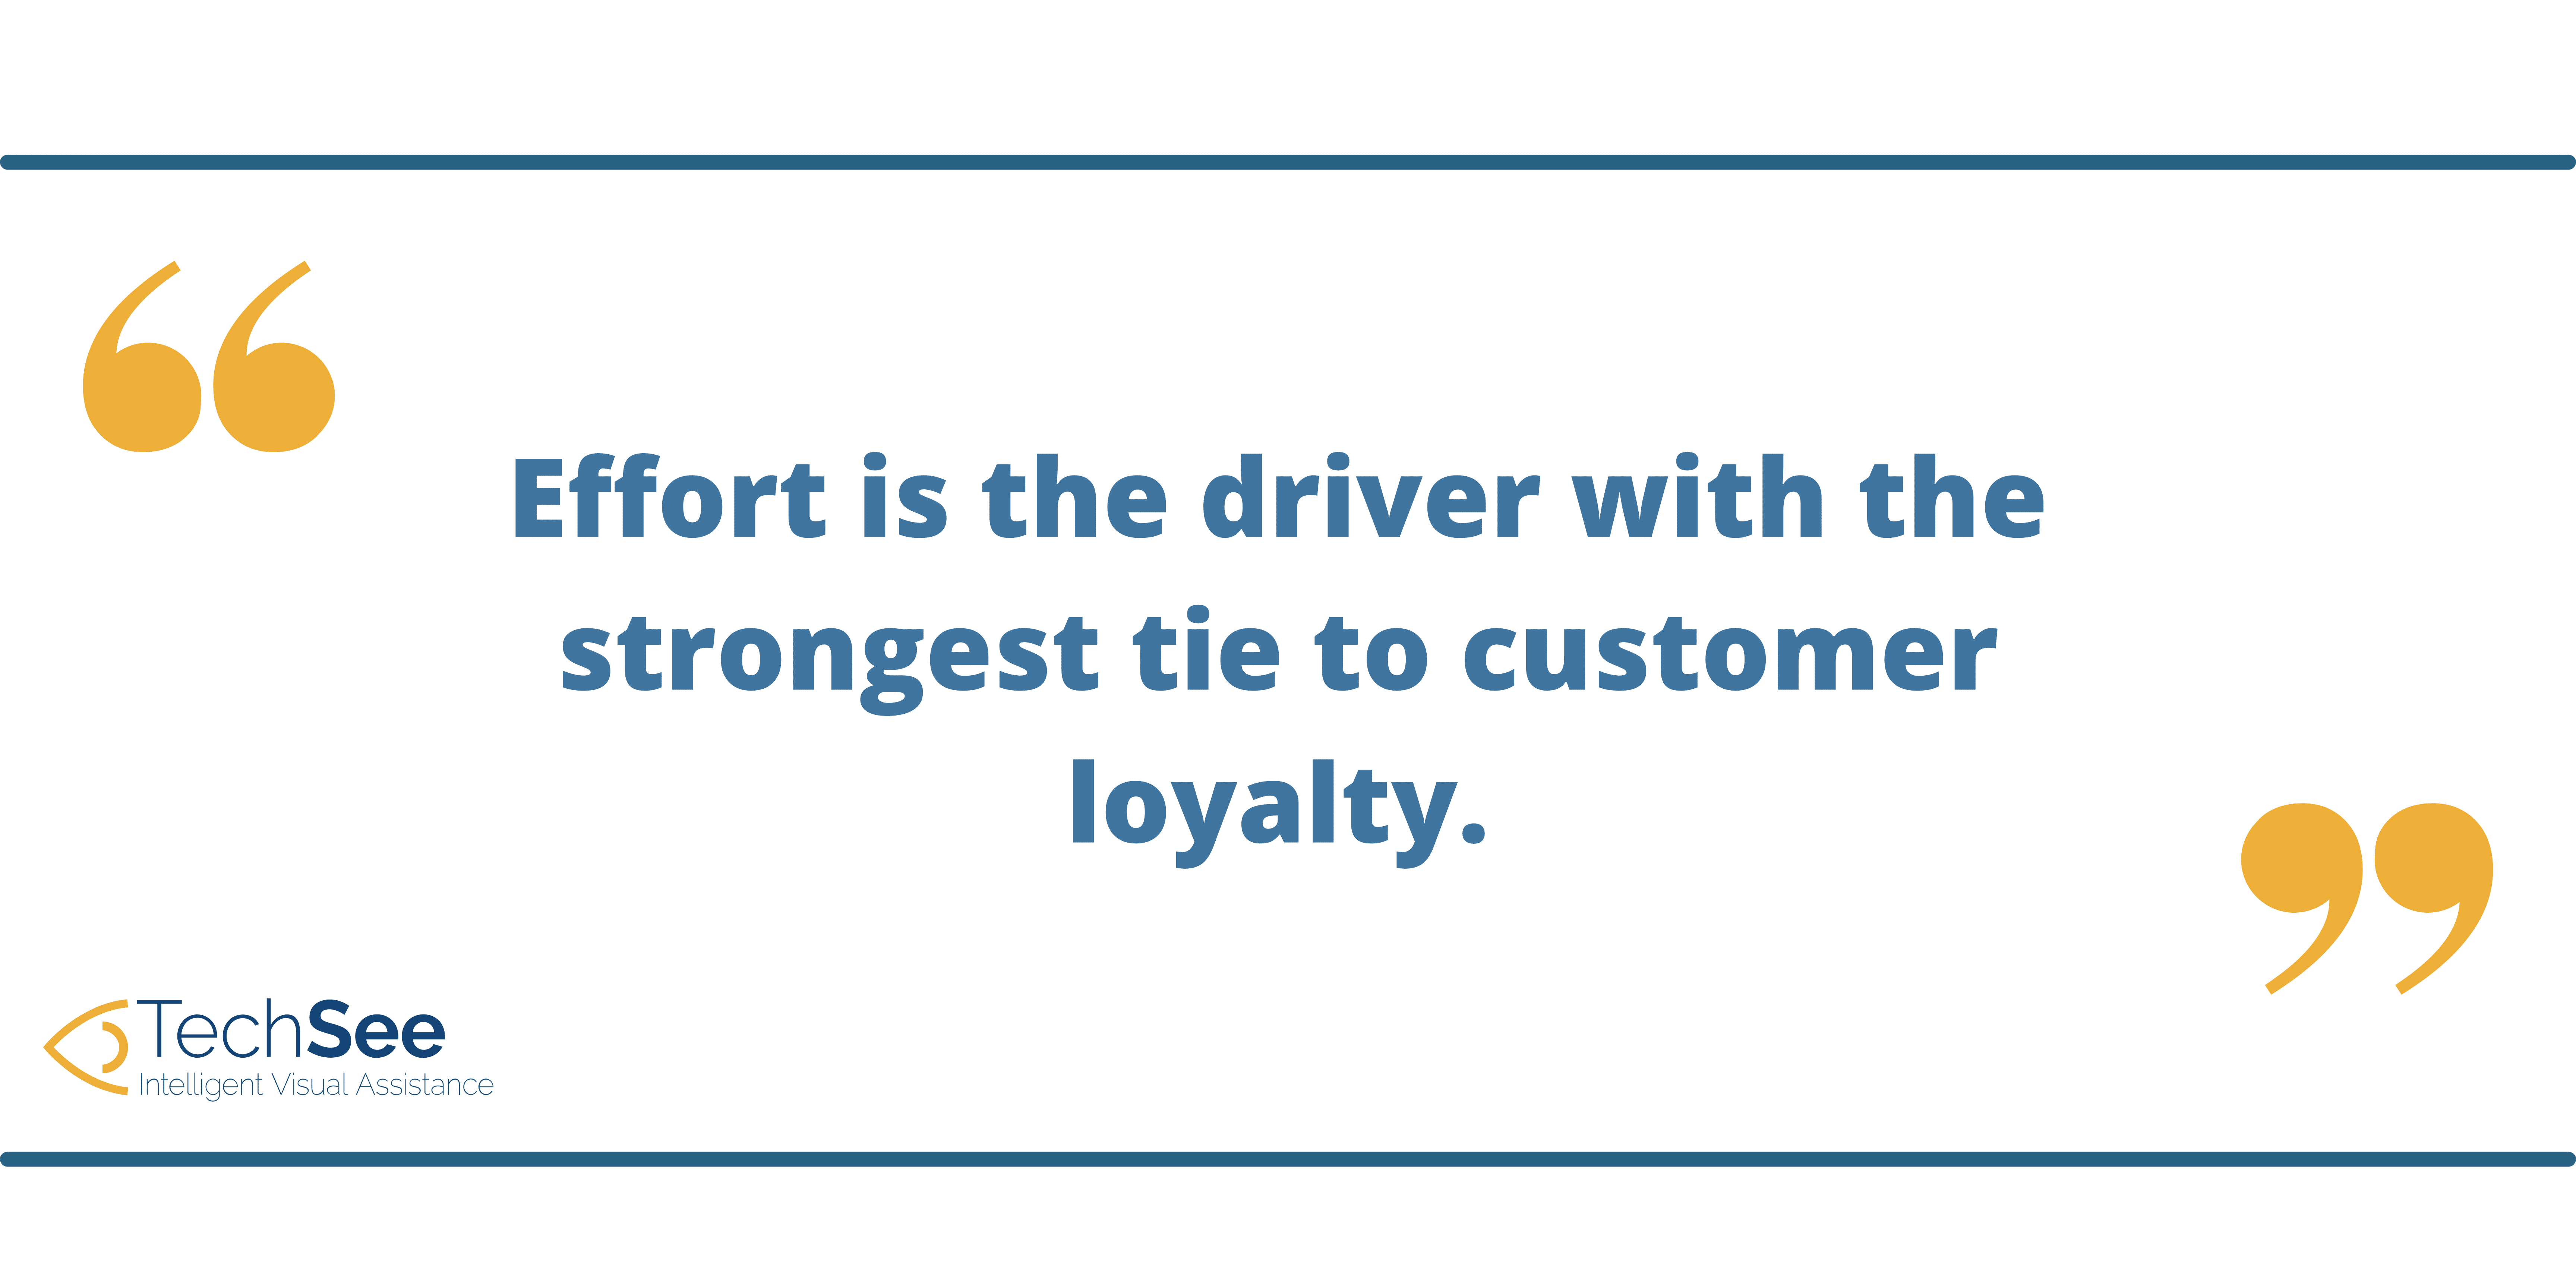 TechSee quotes why call center agent skills are important to customer loyalty.